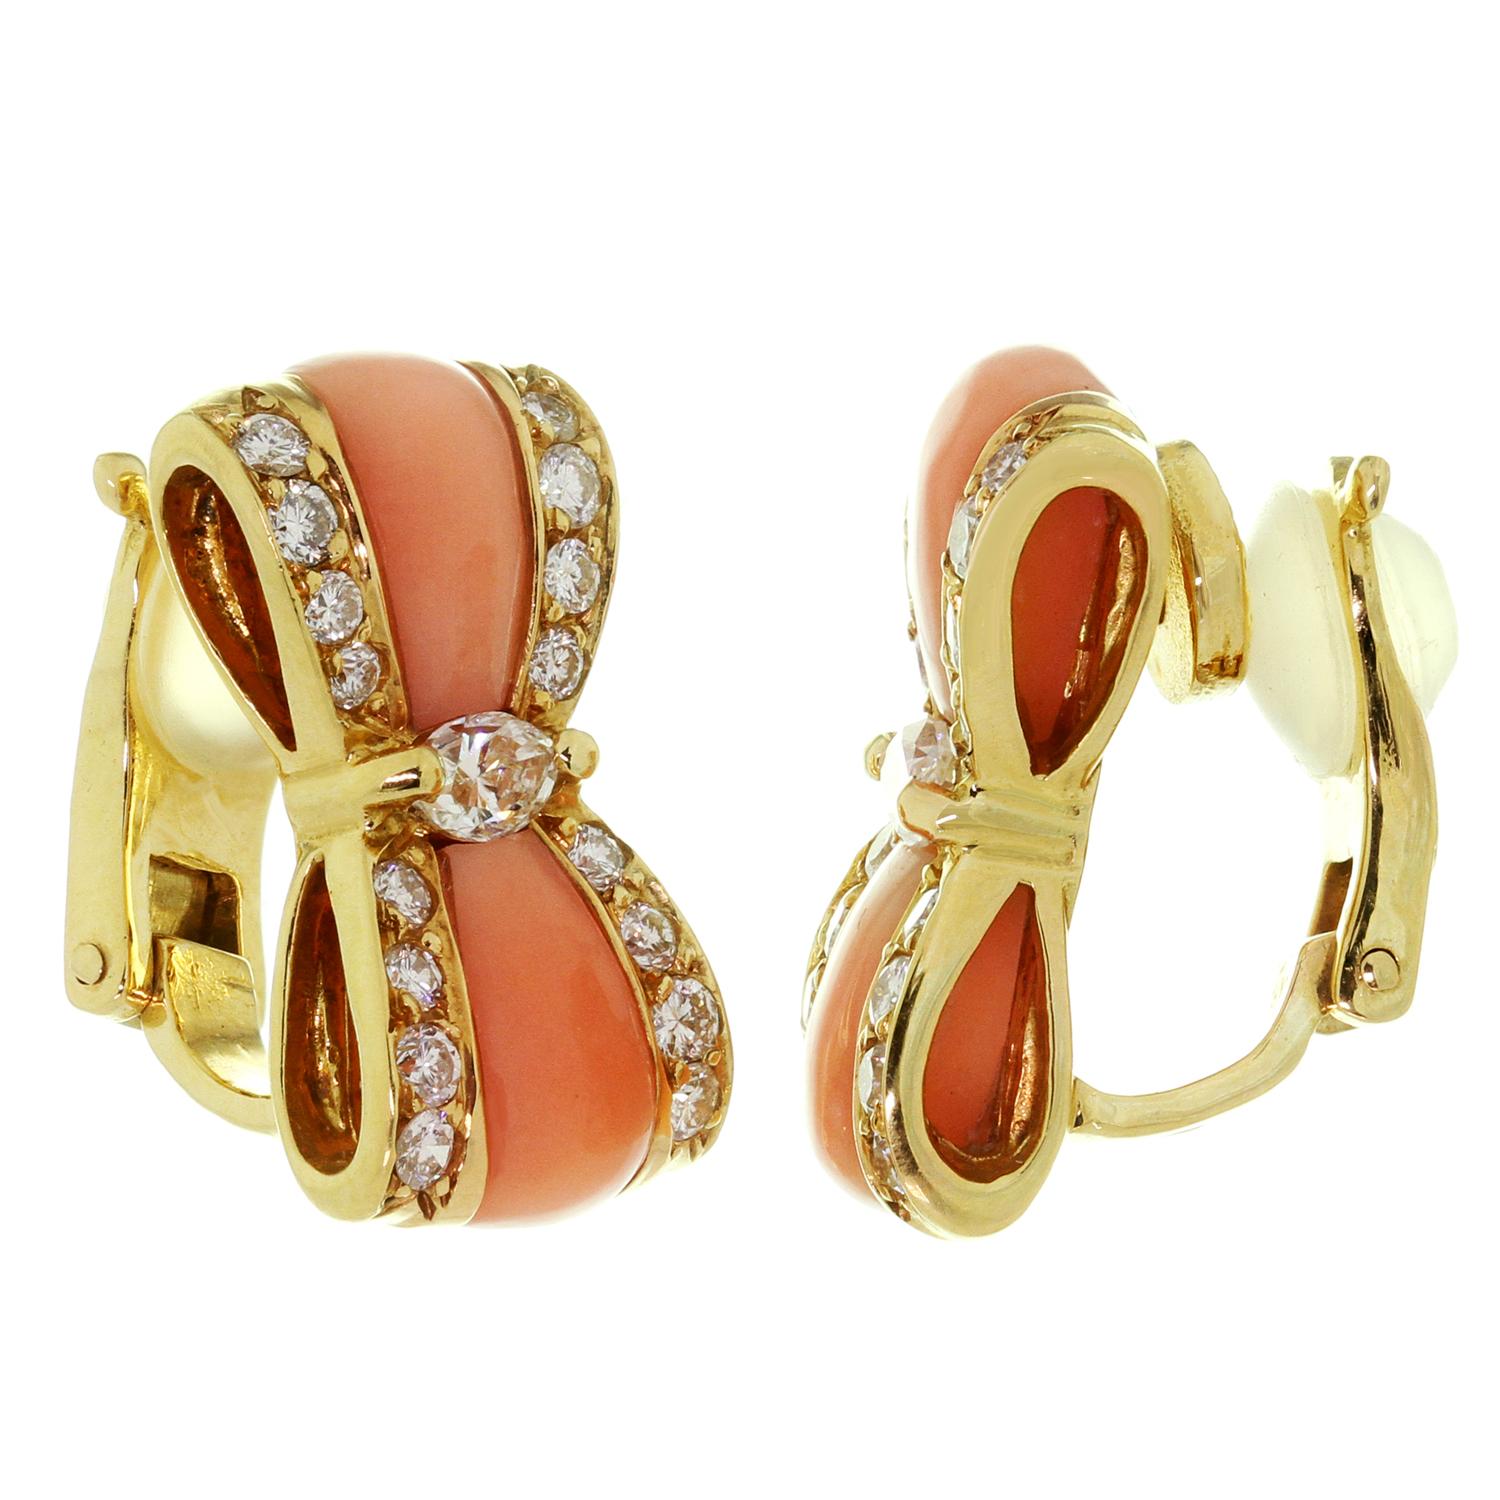 These exqusite vintage clip-on Van Cleef & Arpels earrings are crafted in 18k yellow gold and feature a bow-shaped design set with pink coral and brilliant-cut round E-F VVS1-VVS2 diamonds weighing an estimated 1.16 carats. Made in France circa